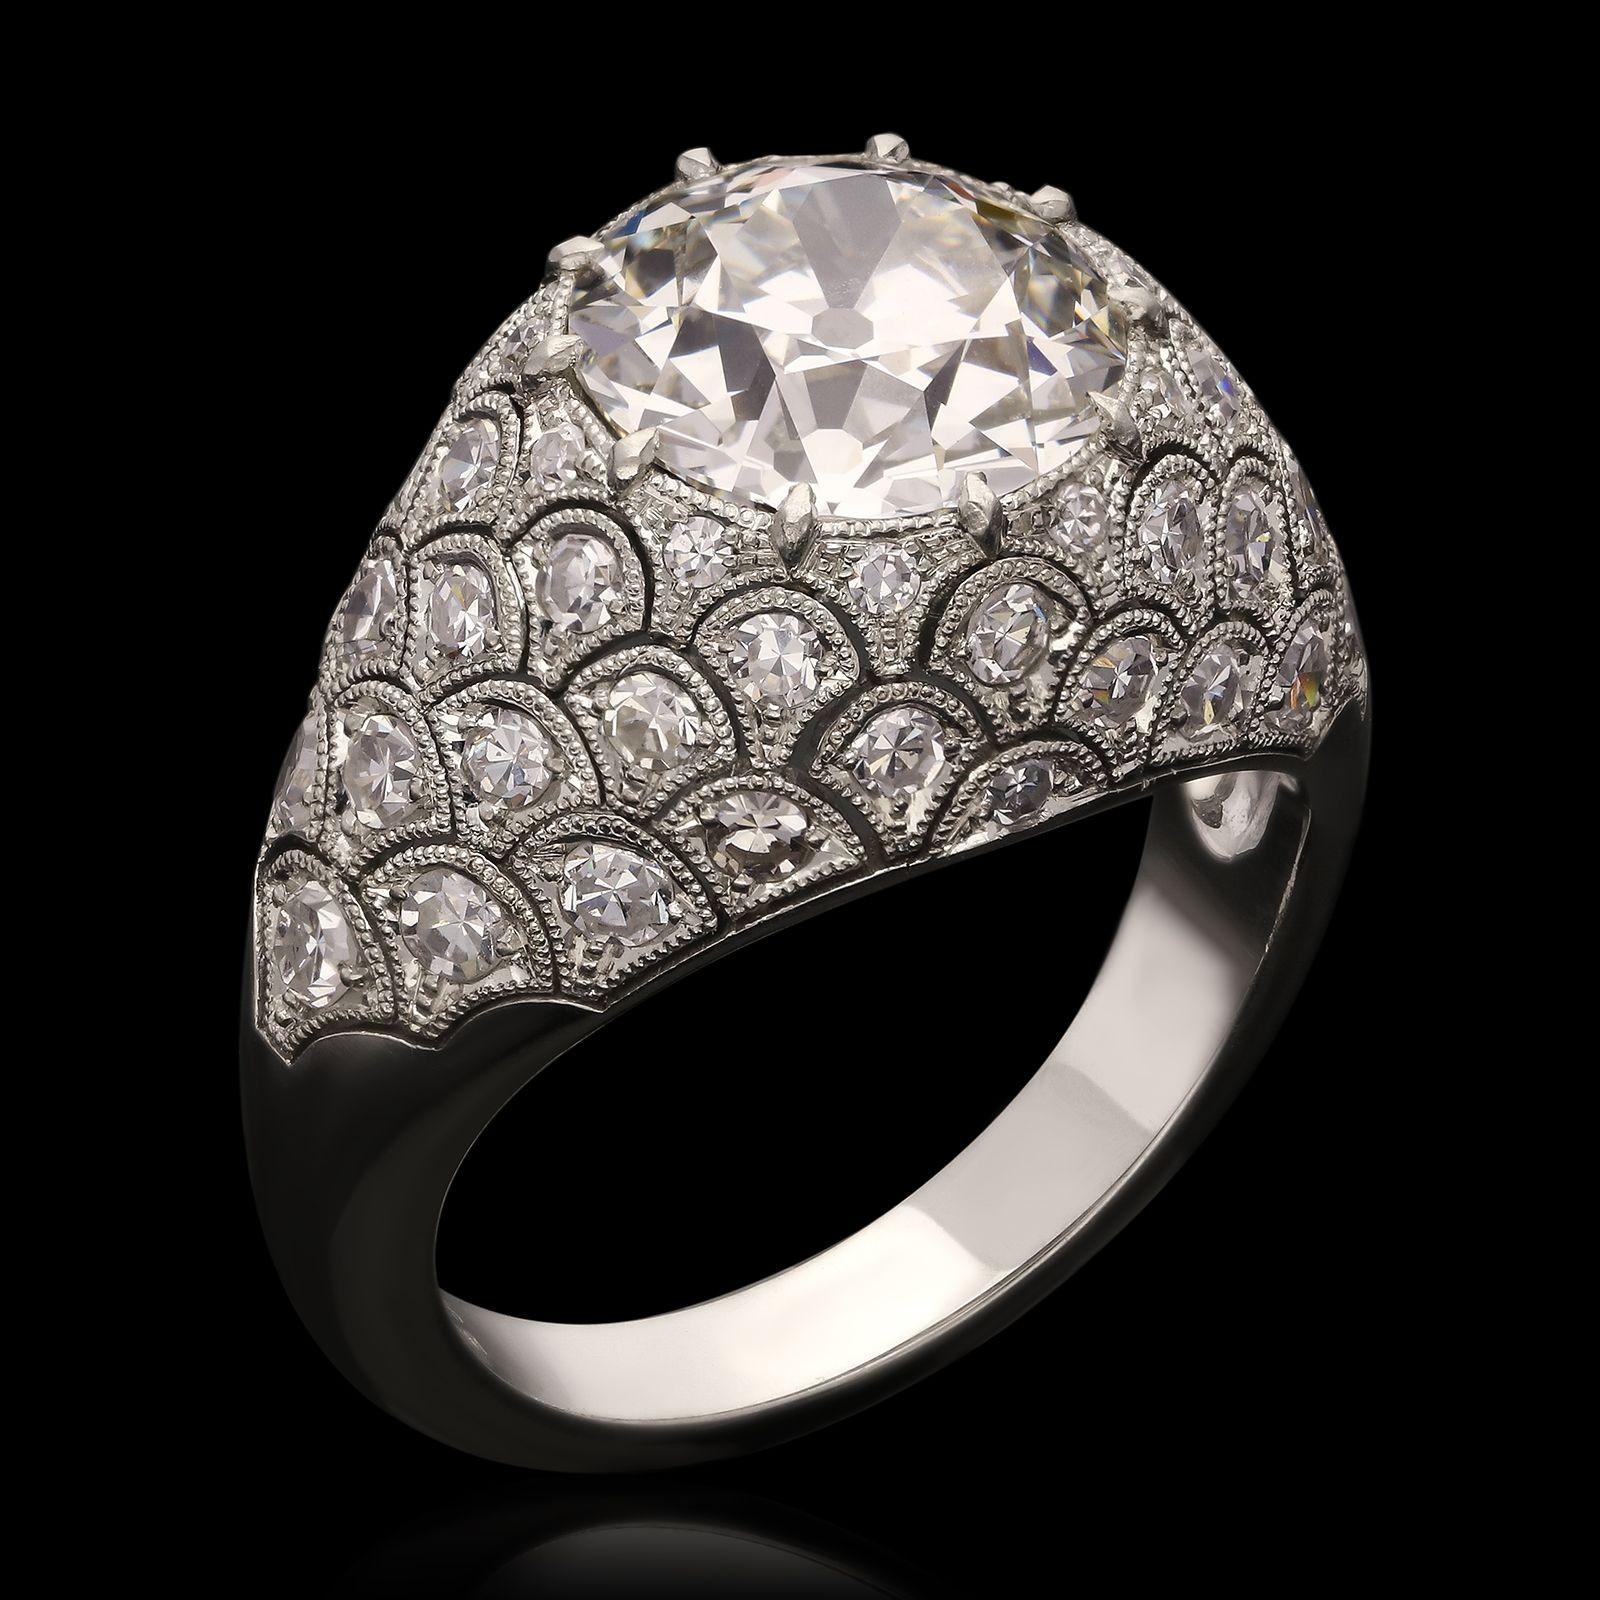 A beautiful old cut diamond bombe ring by Hancocks, centred with a bright and lively old European brilliant cut diamond weighing 3.12ct and of I colour and VVS2 clarity claw set within a beautiful bombe-style handmade platinum mount exquisitely